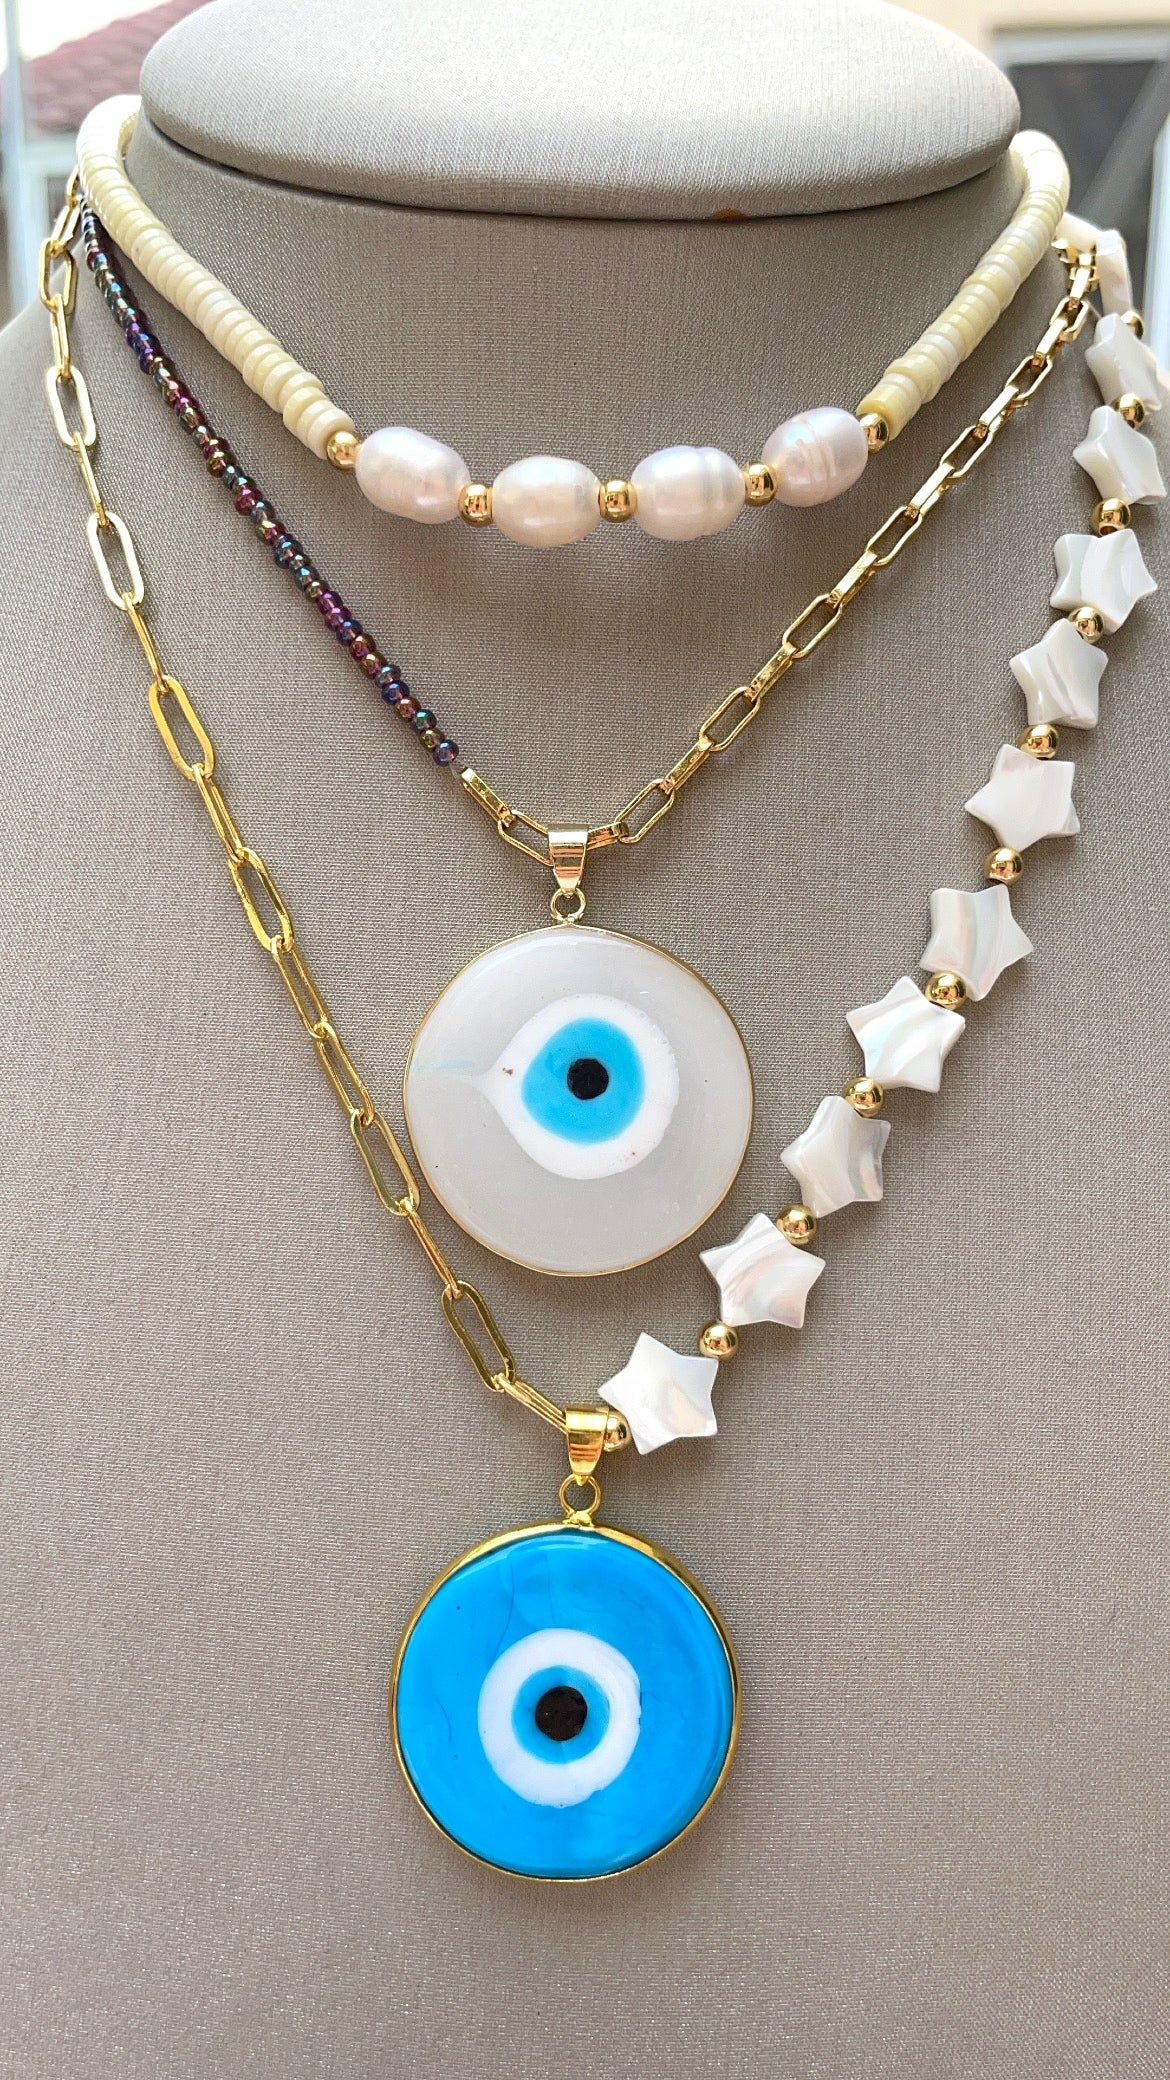 Half and half beads and link evil eye pendant necklace